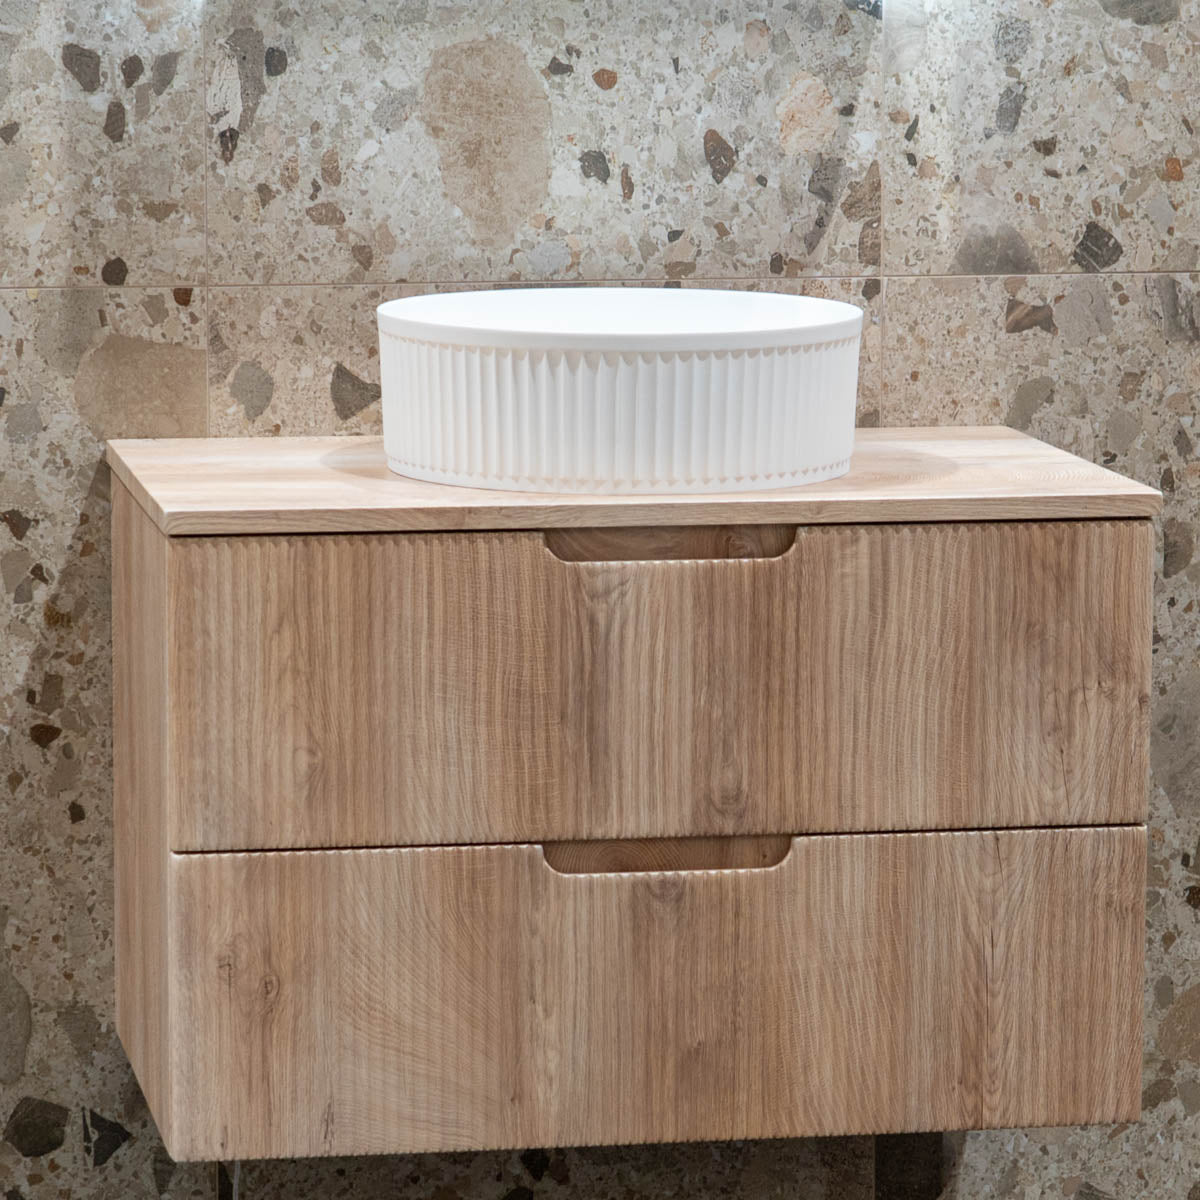 Granlusso Fluted Solid Surface Countertop Basin Round